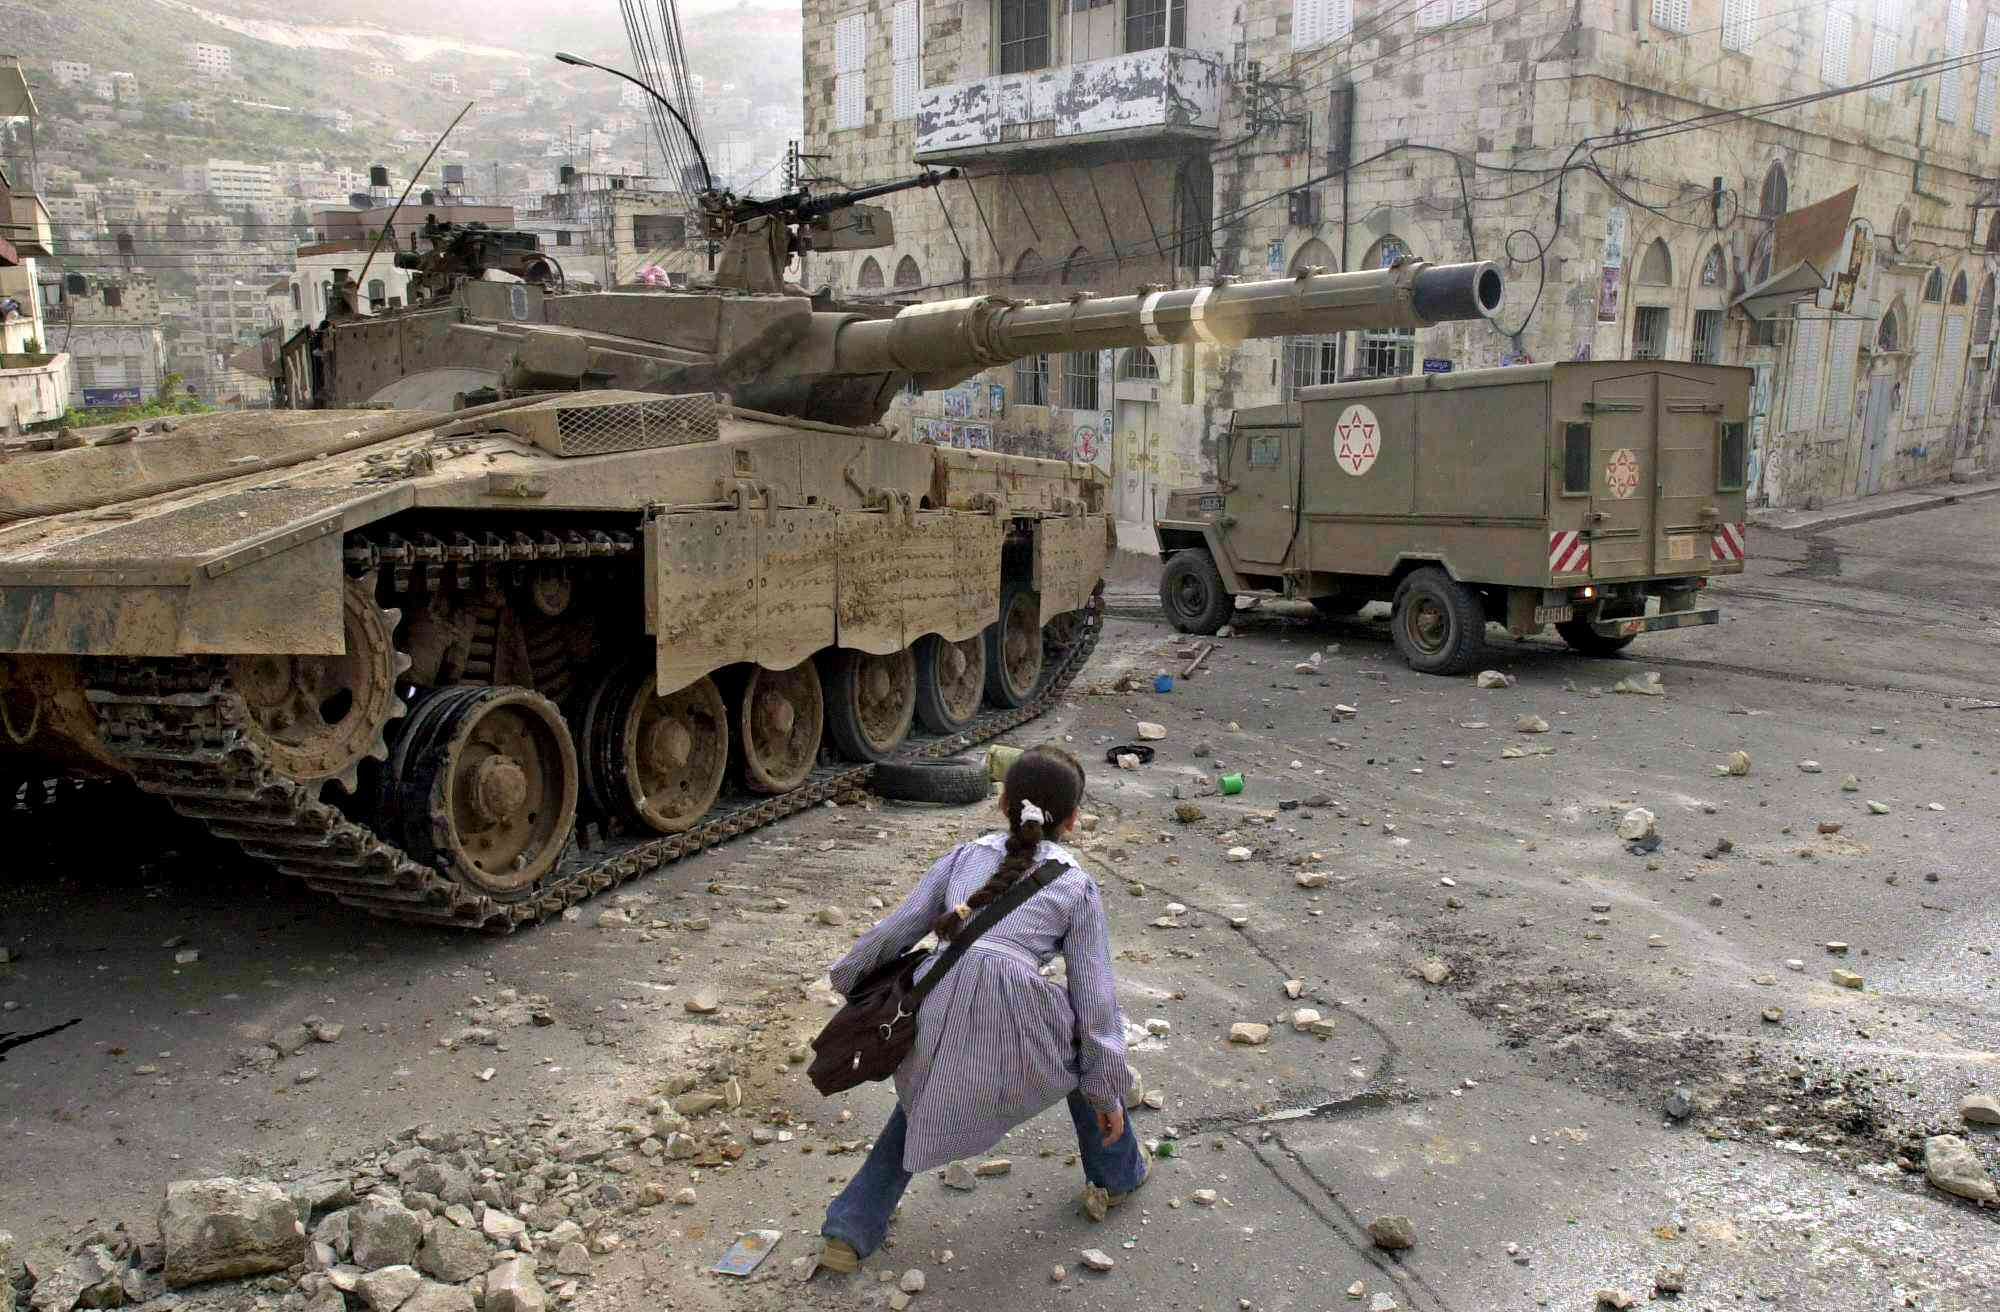 A girl creeps past an Israeli tank in Nablus in April 2003 in this photo by Nasser Ishtayer (AP)